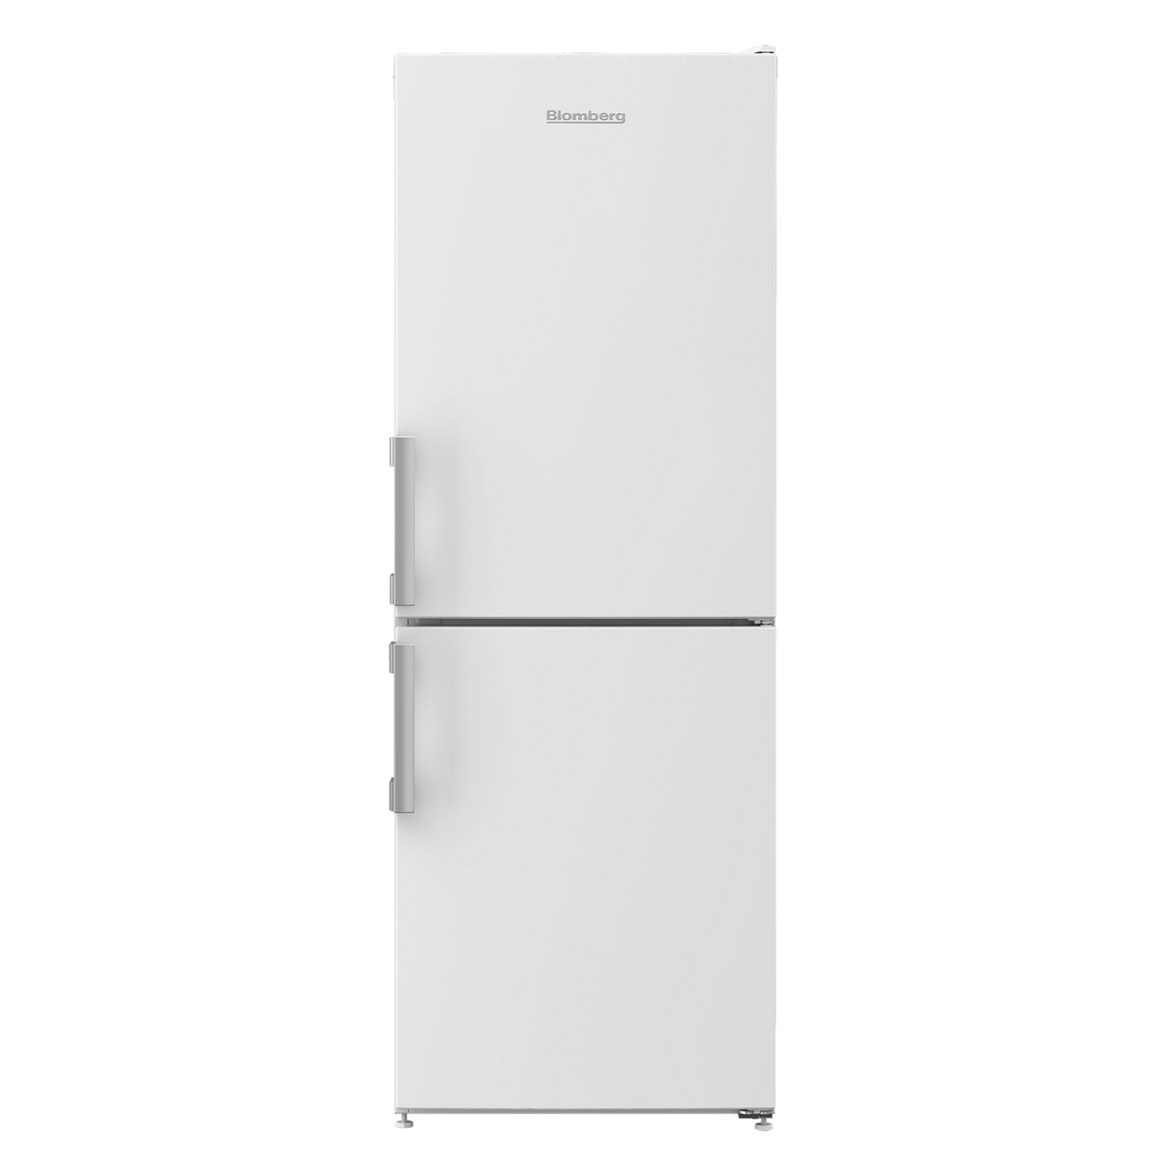 Blomberg KGM4513 54cm Frost Free Fridge Freezer in White 1 52m F Rated